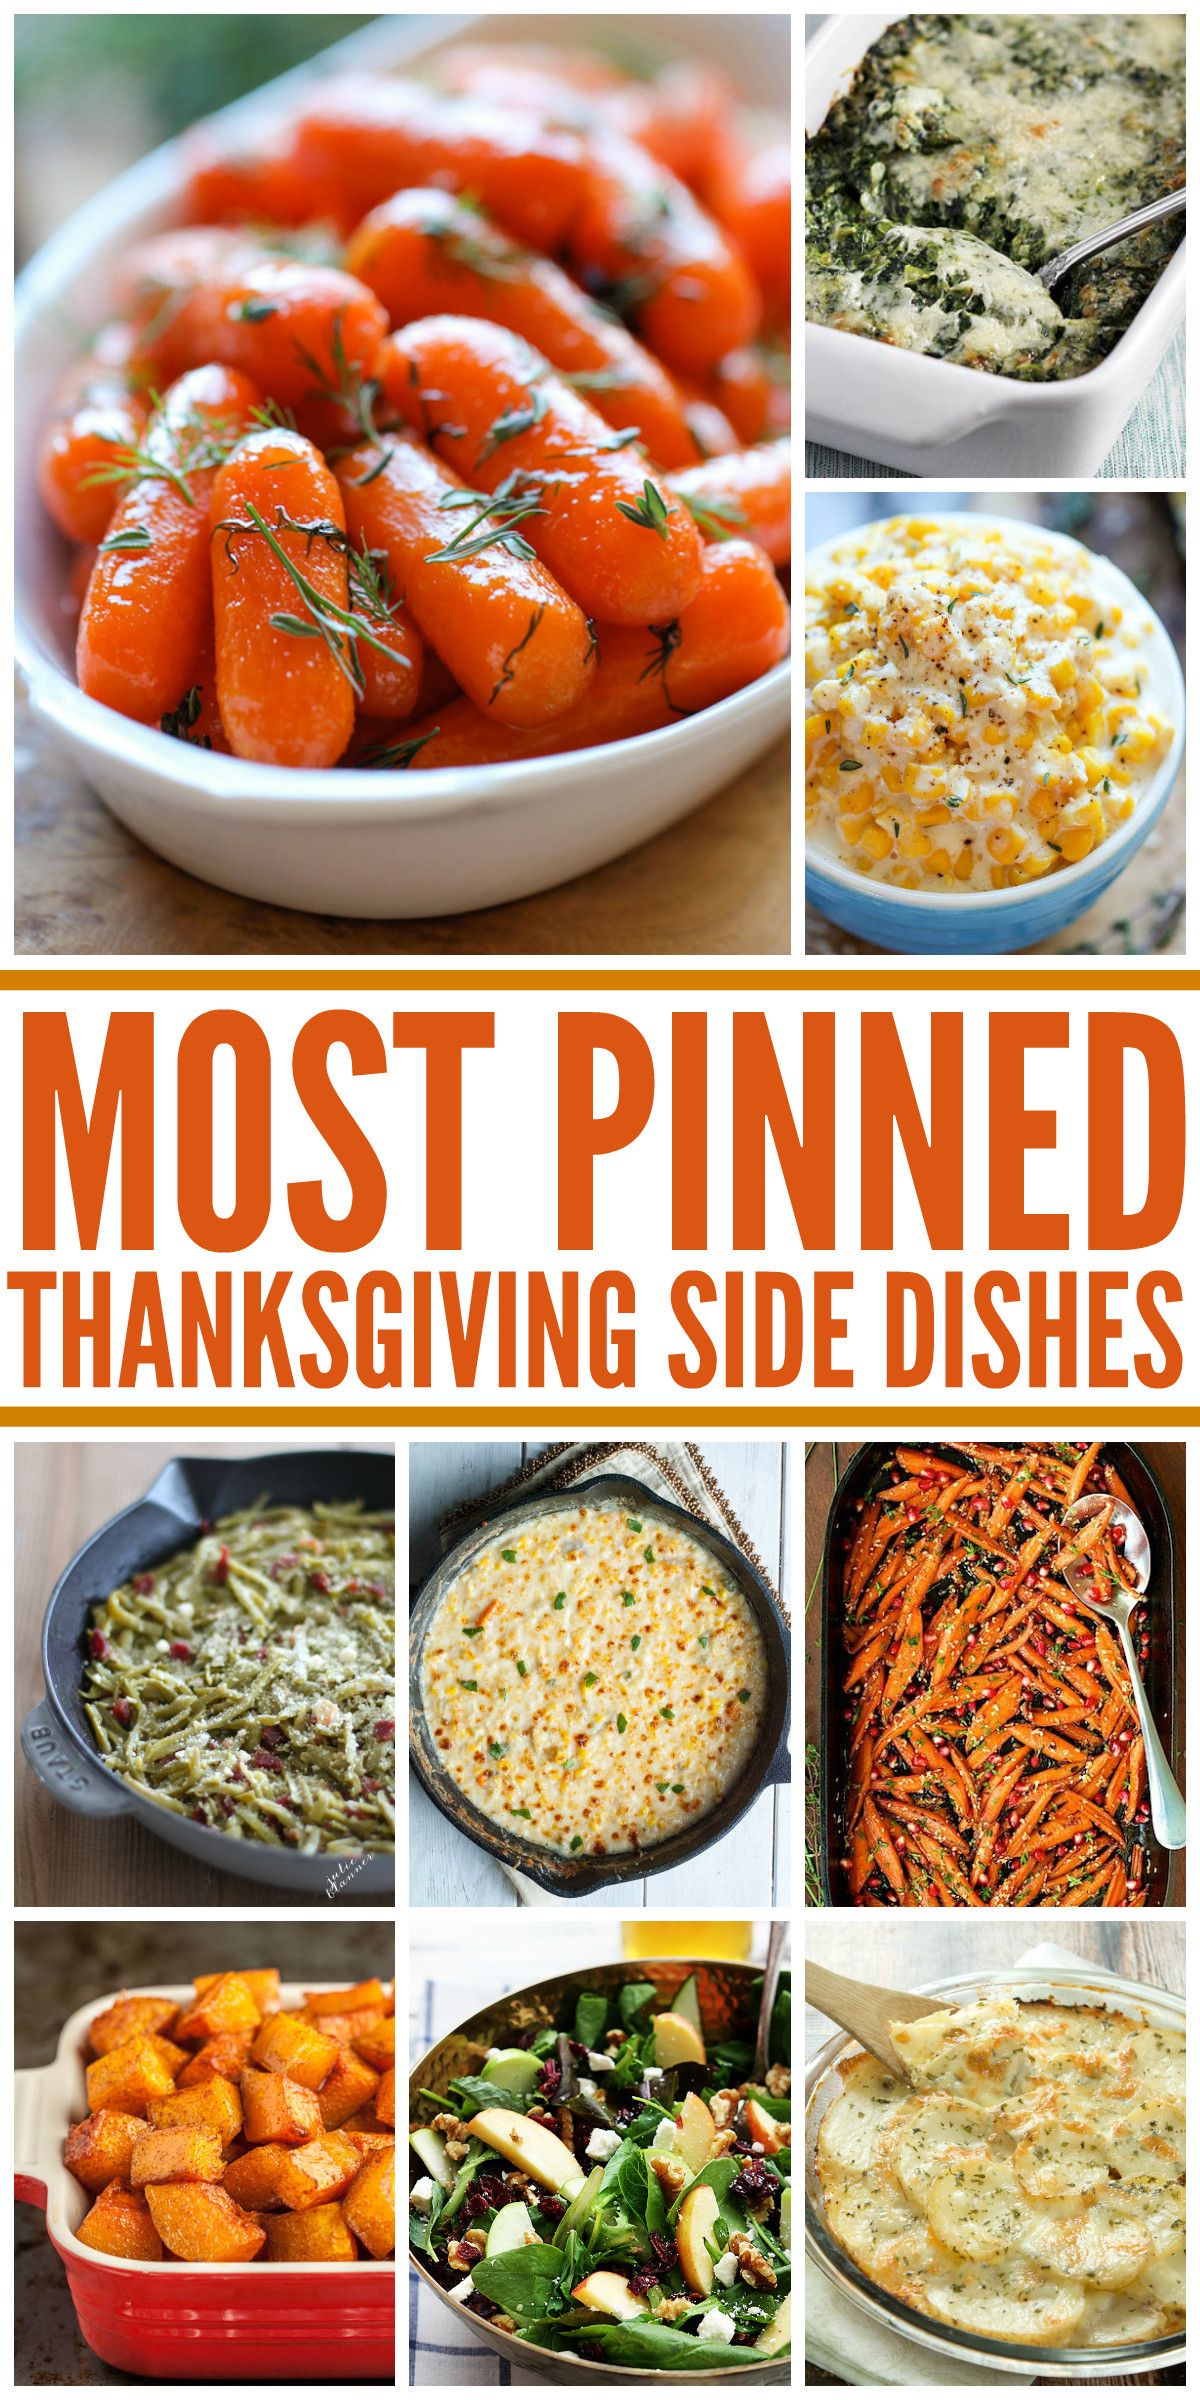 Best Thanksgiving Side Dishes
 25 Most Pinned Side Dish Recipes for Thanksgiving and